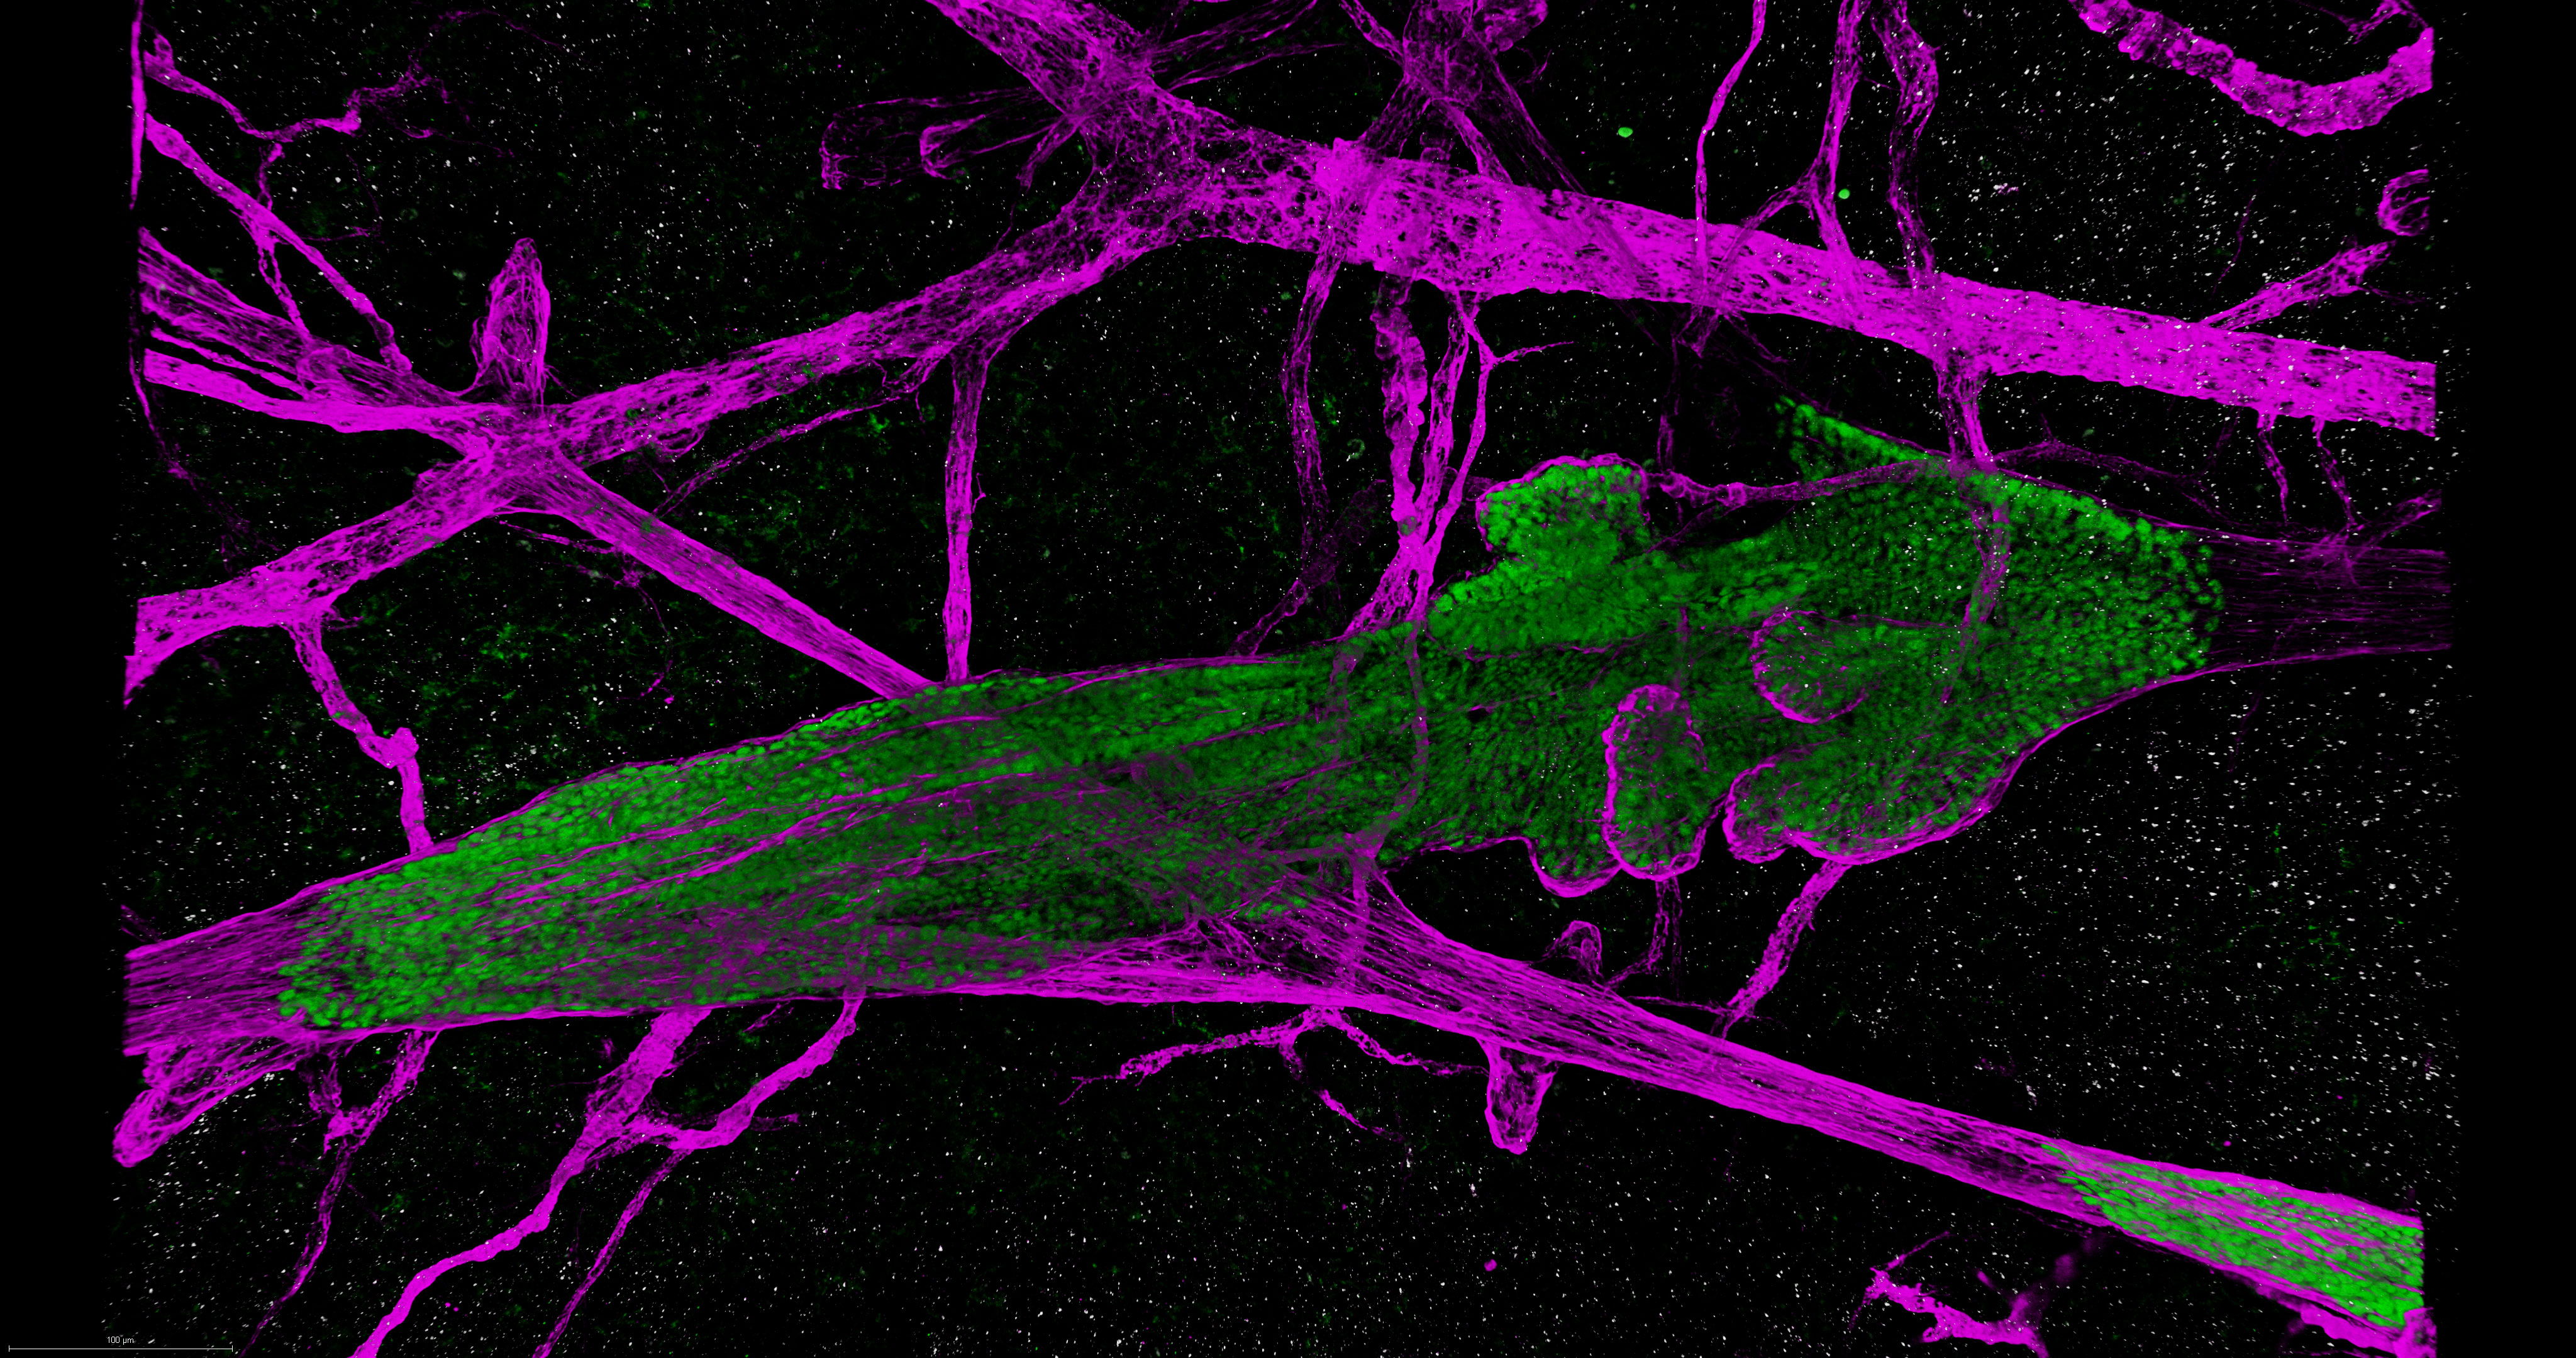 Replacement growth of DCIS cells (green) in murine breast epithelium (purple)